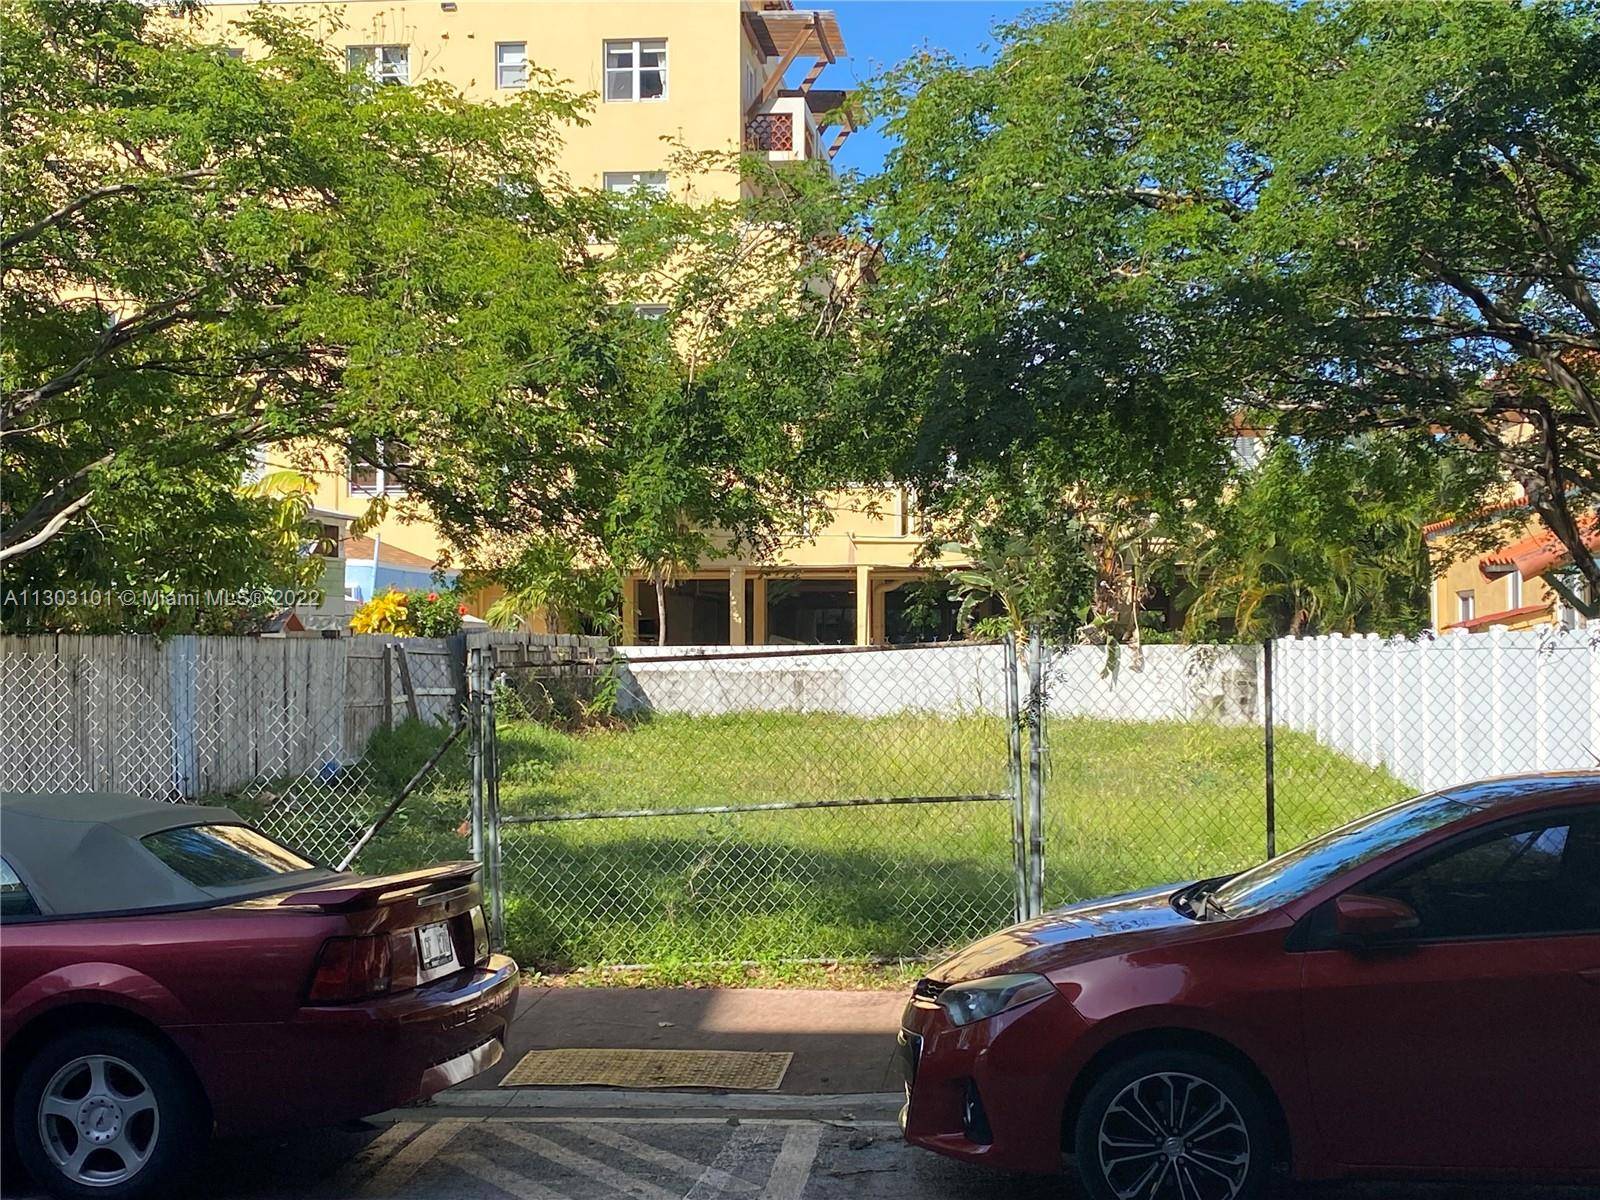 Rare opportunity to buy an empty lot in SoFi, South of Fifth, Miami Beach.